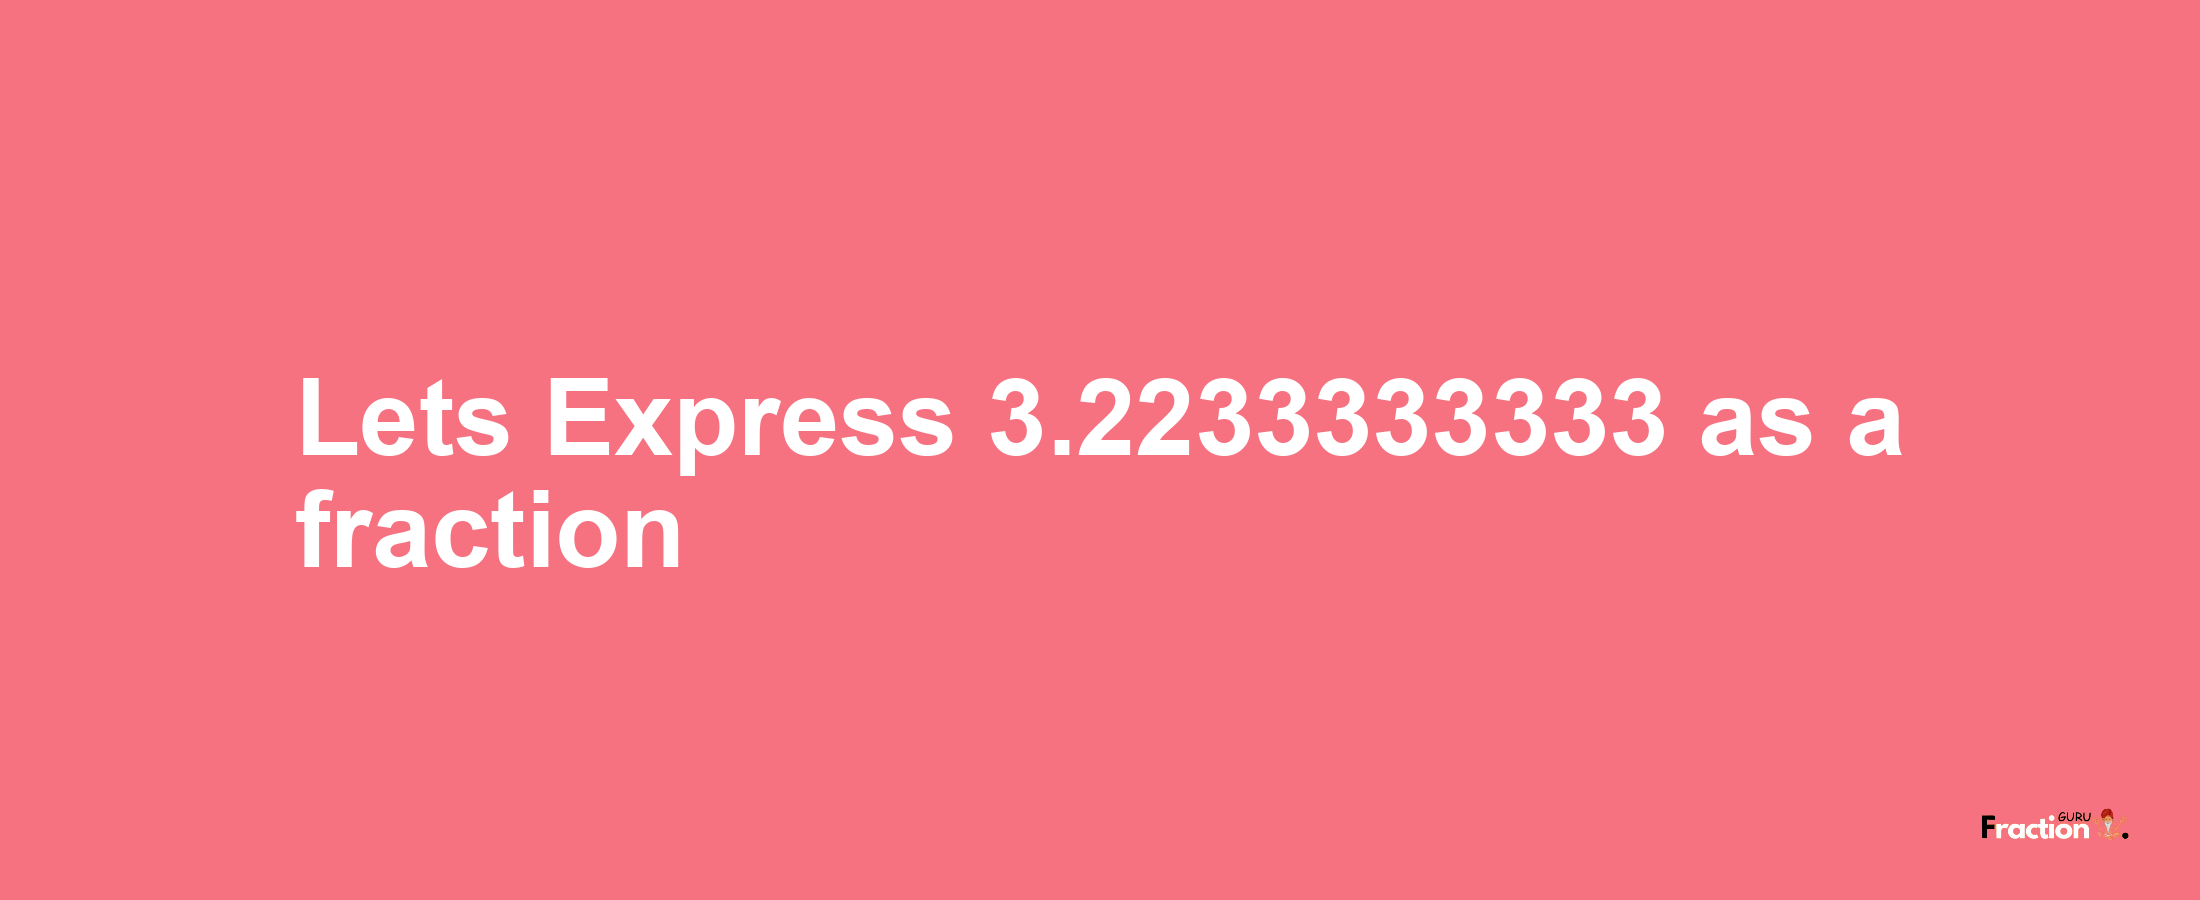 Lets Express 3.2233333333 as afraction